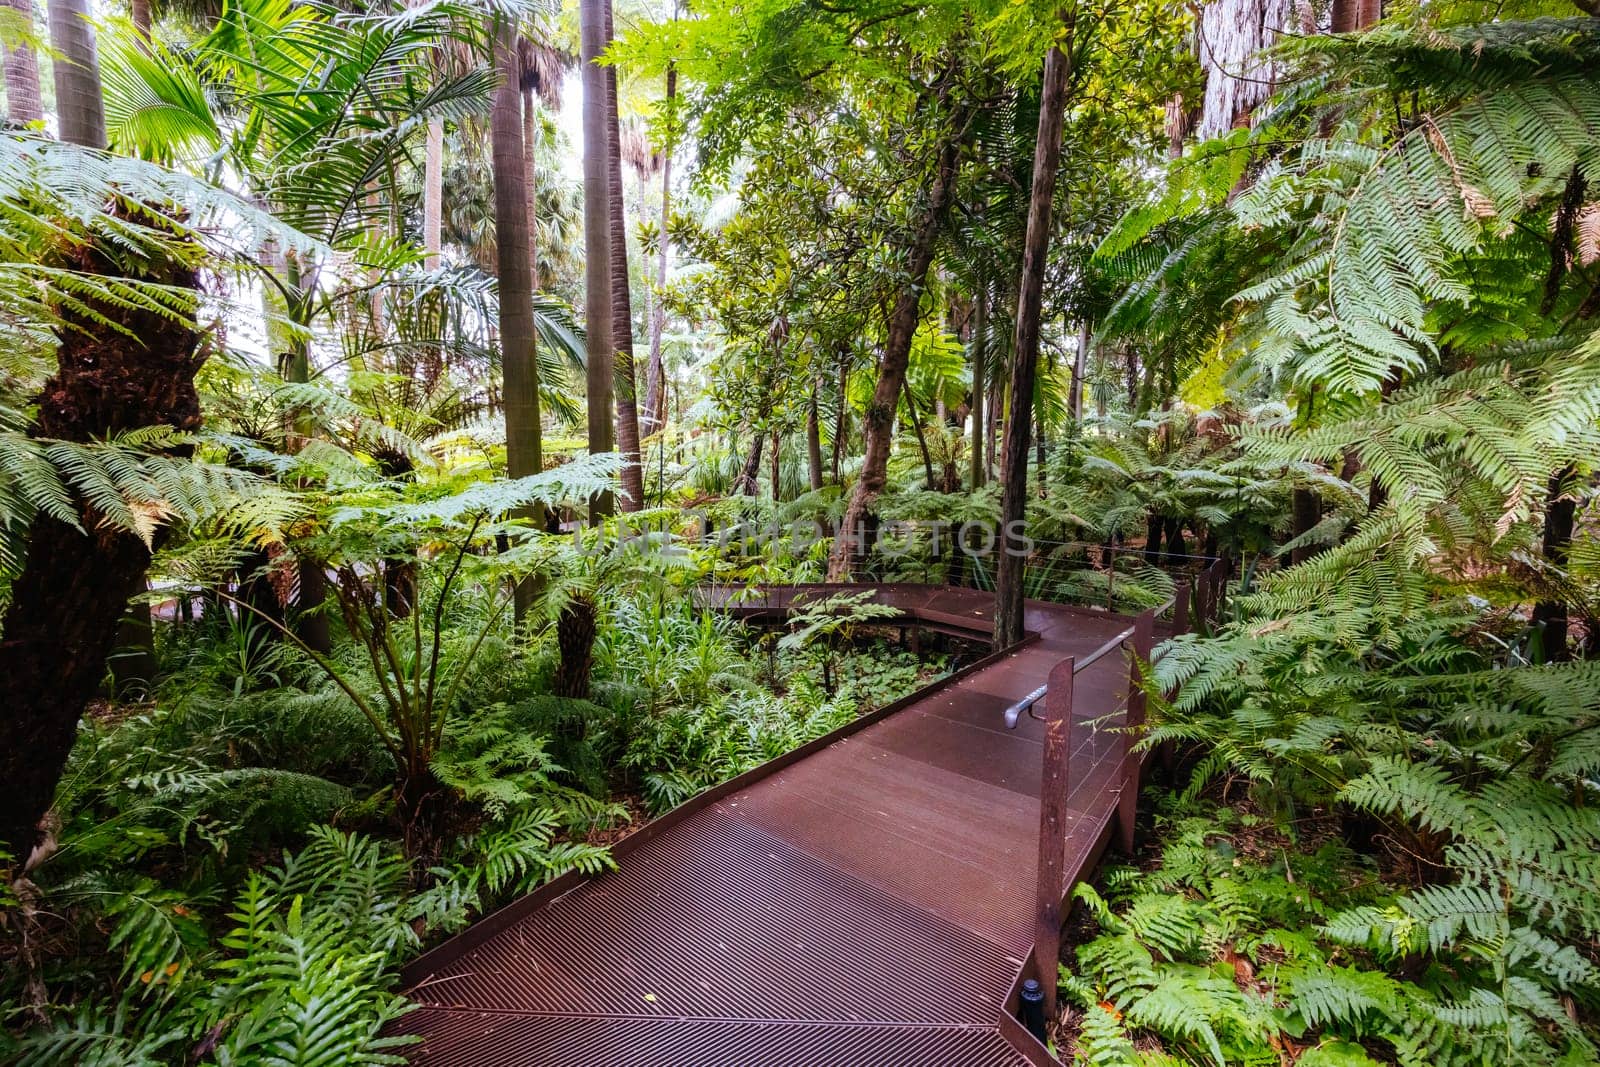 Fern Gully at Royal Botanic Gardens Victoria on a cool autumn morning in Melbourne, Victoria, Australia